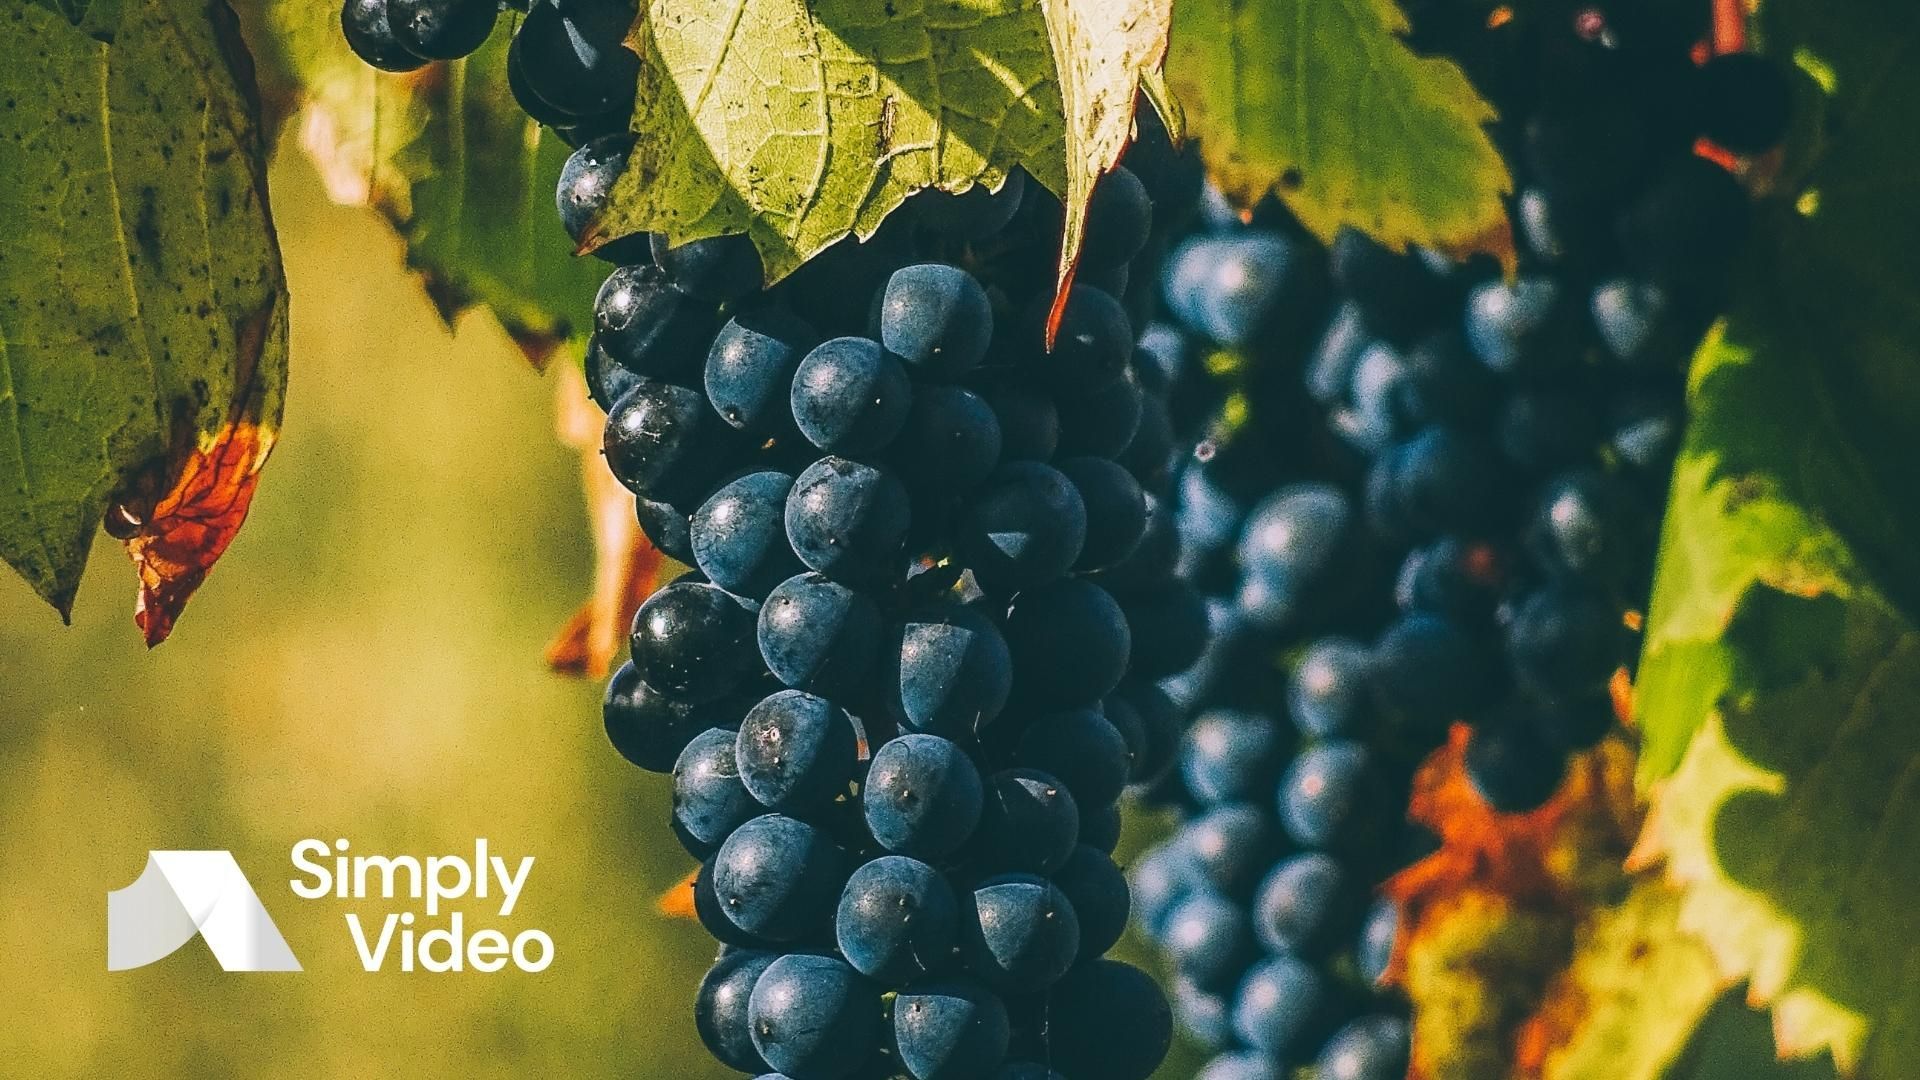 XR technologies are transforming industries worldwide. How can the wine industry balance immersive new tech with its traditional roots? Find out more.